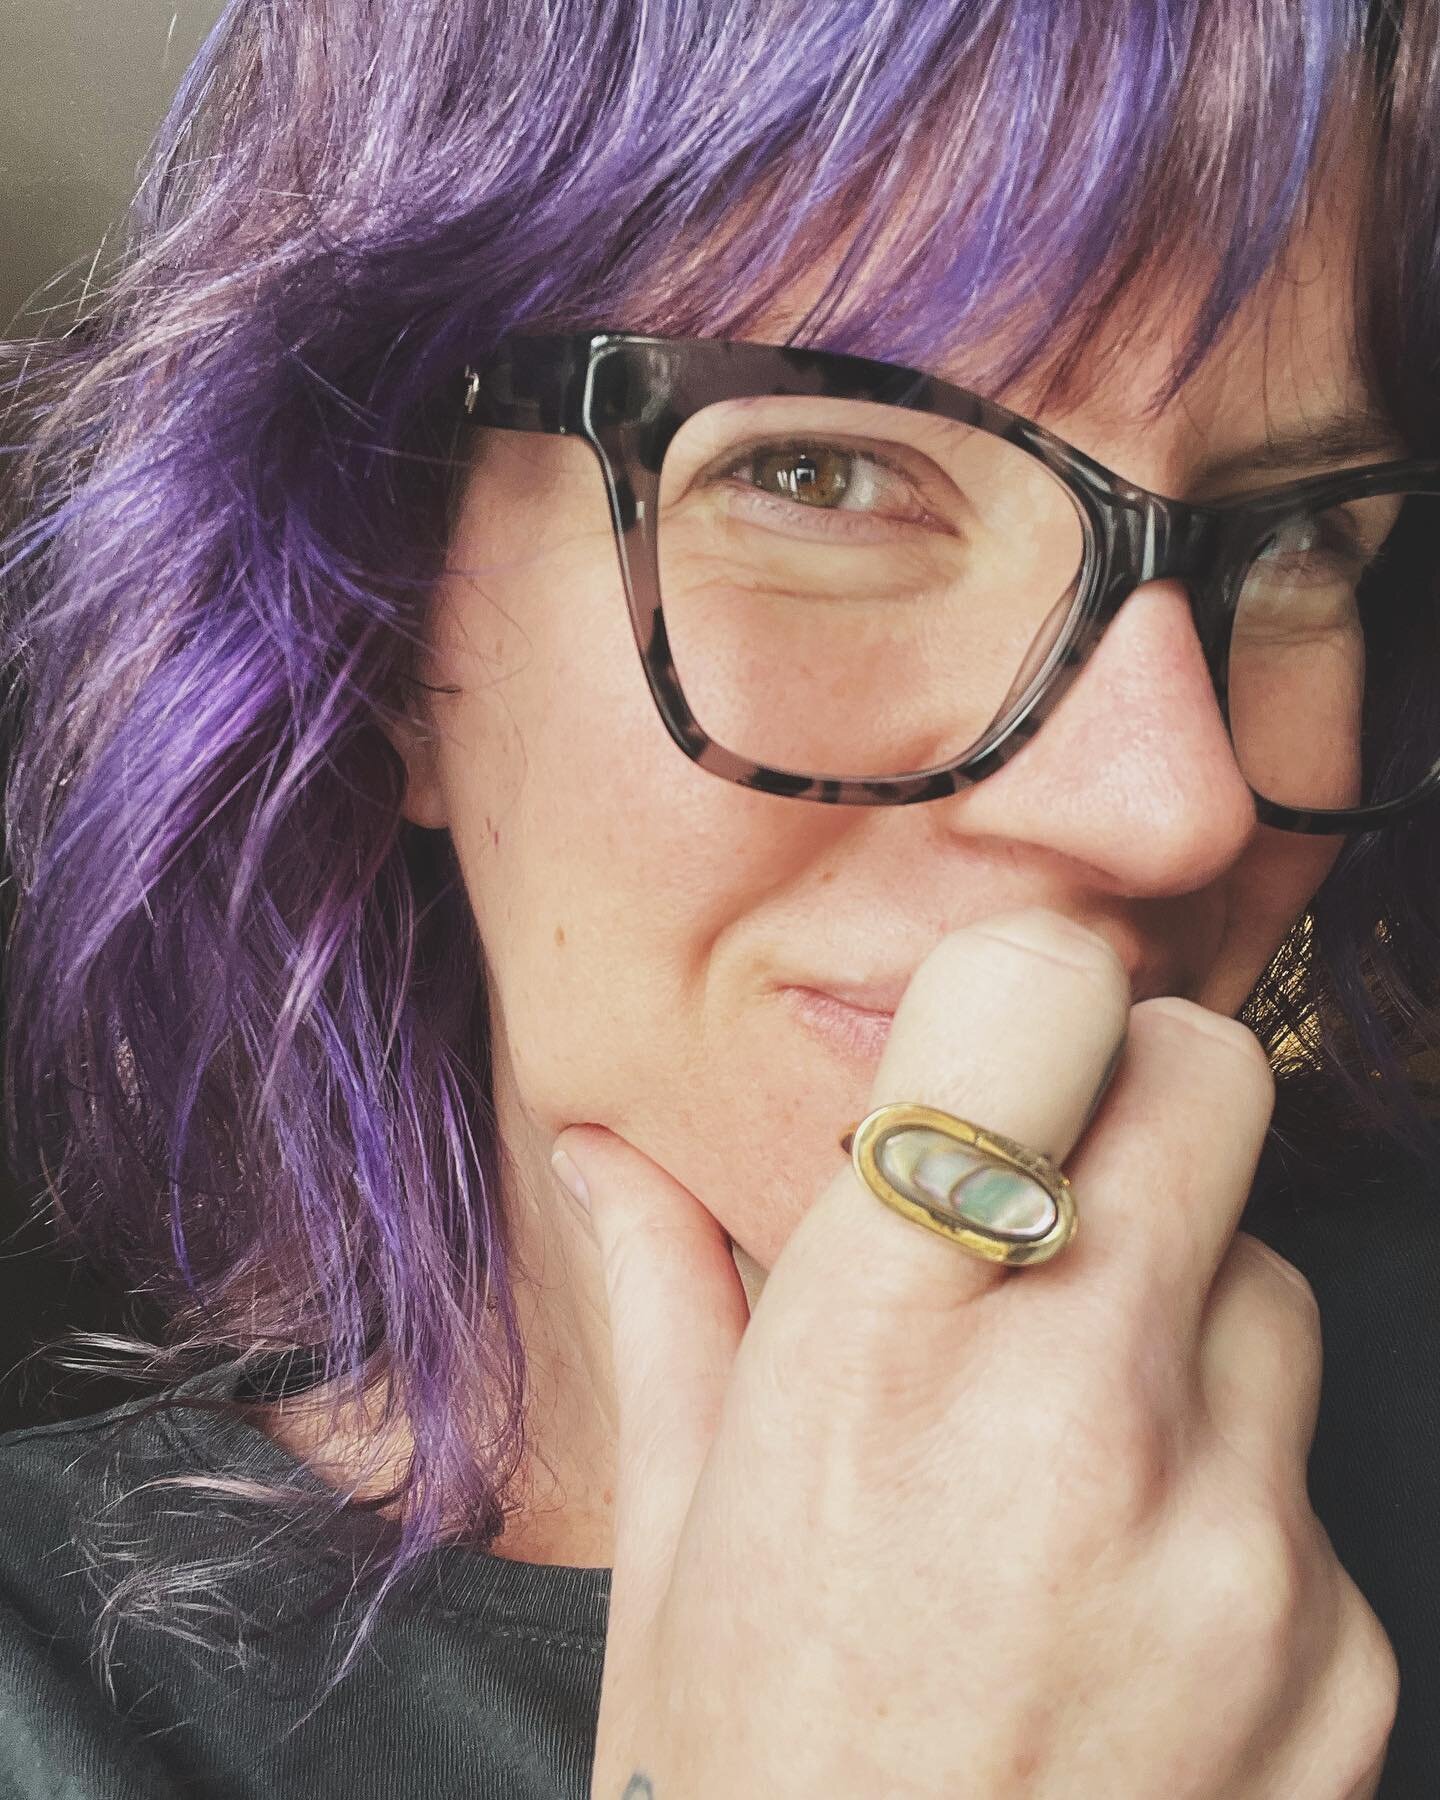 Living my very best unicorn life over here with my purple hair and abalone Stella ring. #bestlife #purplehair #goinggreyjourney #abalone #unicorn #🦄🦄🦄🌈🌈🌈🦄🦄🦄🌈🌈🦄🦄🌈🦄🌈🌈🦄🦄🌈🦄🌈🦄🌈🦄🌈🦄🌈🦄🌈🦄🌈🦄🌈🦄🌈🦄🌈🦄🌈🦄🌈🦄🌈🦄🌈🦄🌈🦄🌈🦄?